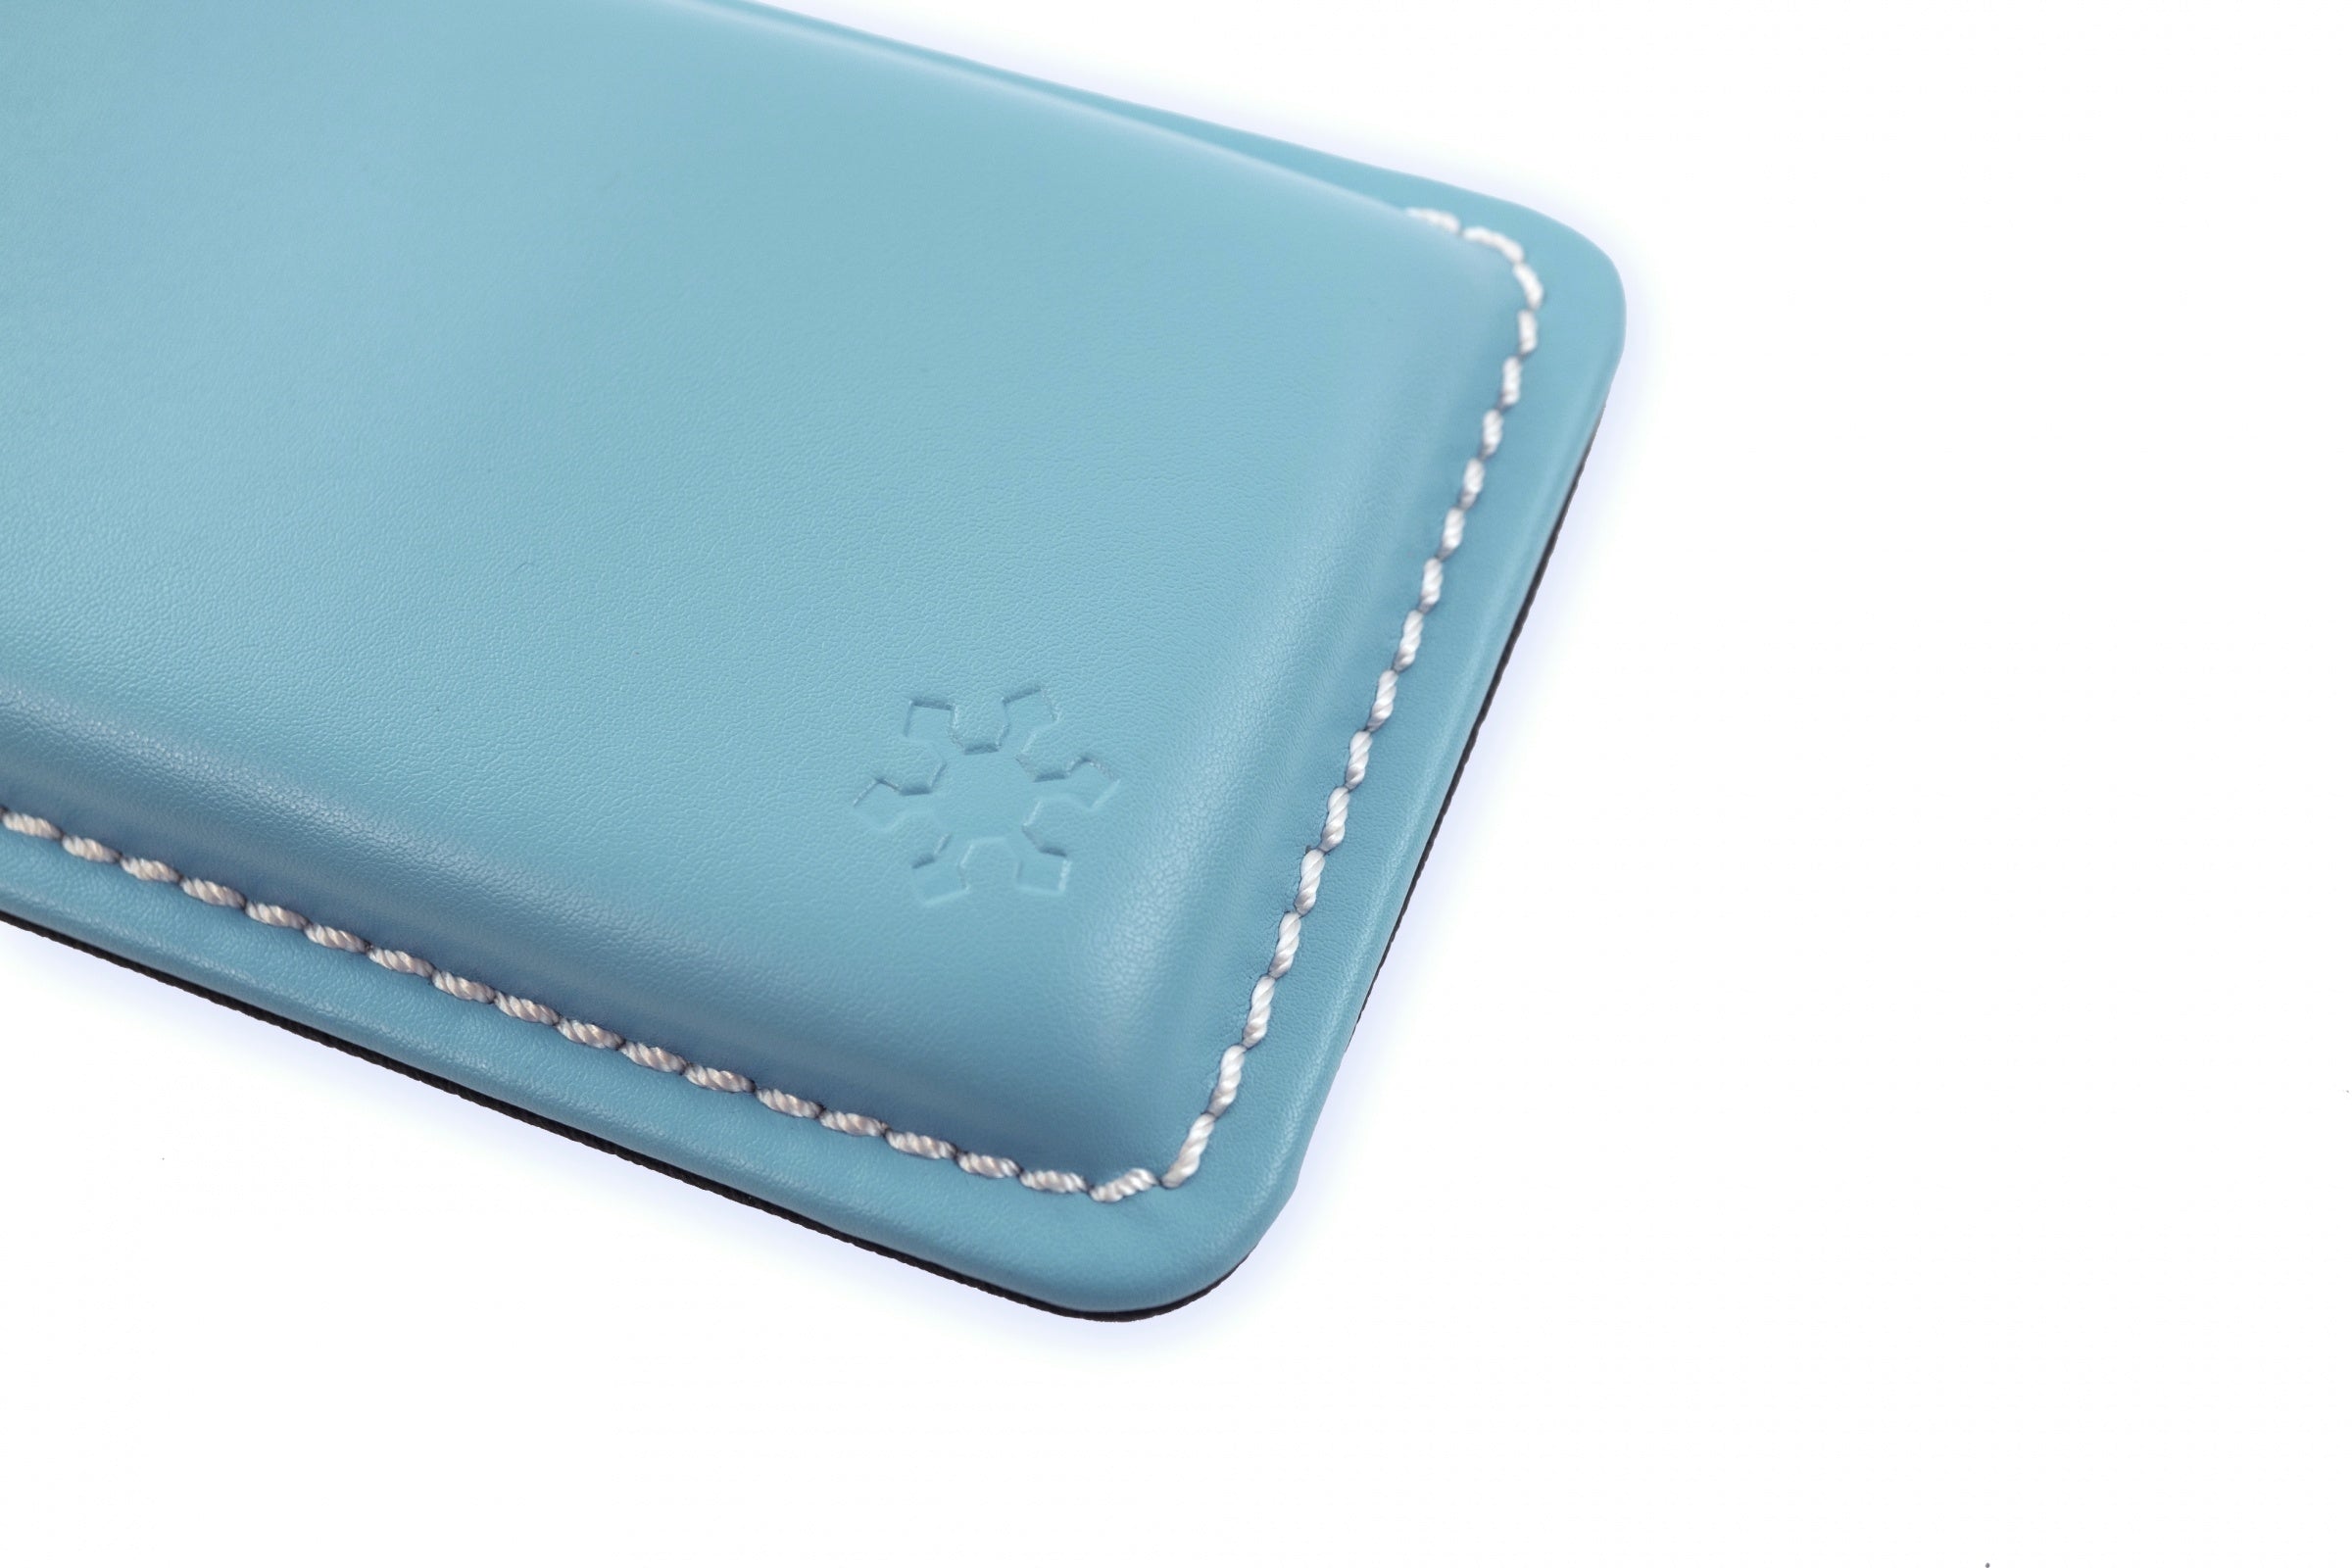 MK Snowflake Compact 60% Wrist Rest Blue Leather w/ White Stitching MKGQY8A29H |26952|